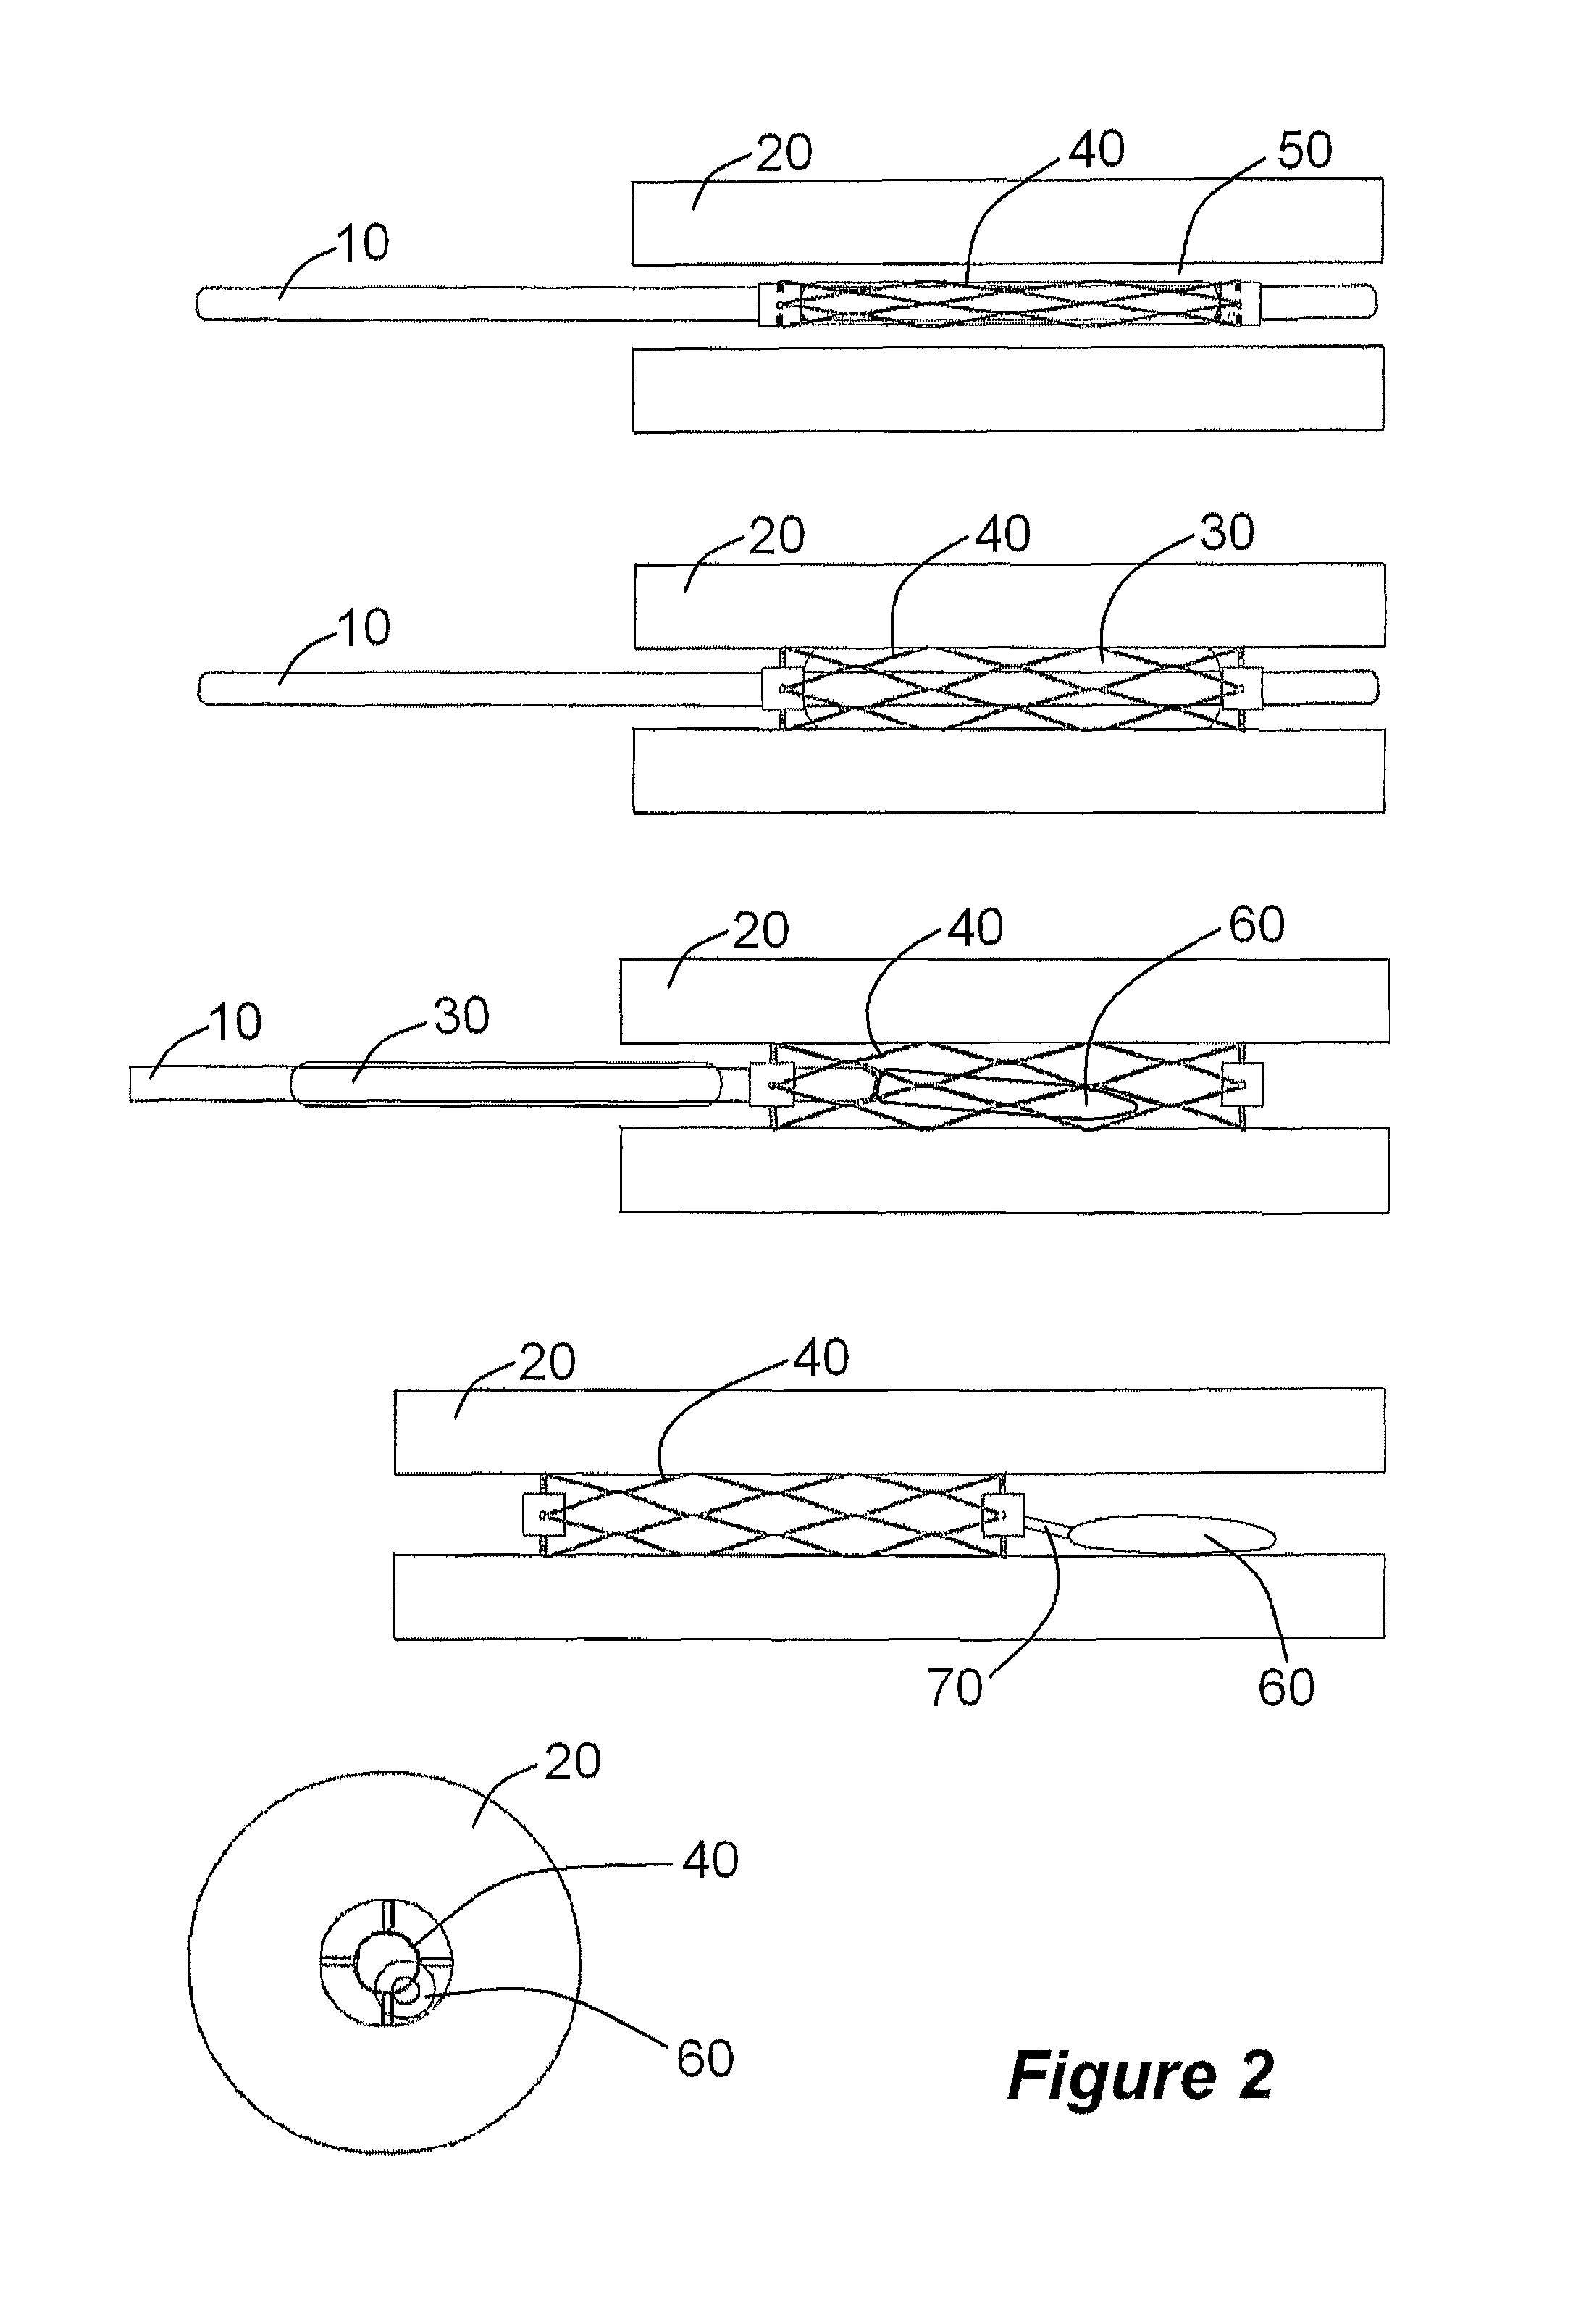 Devices, systems and methods for controlling local blood pressure